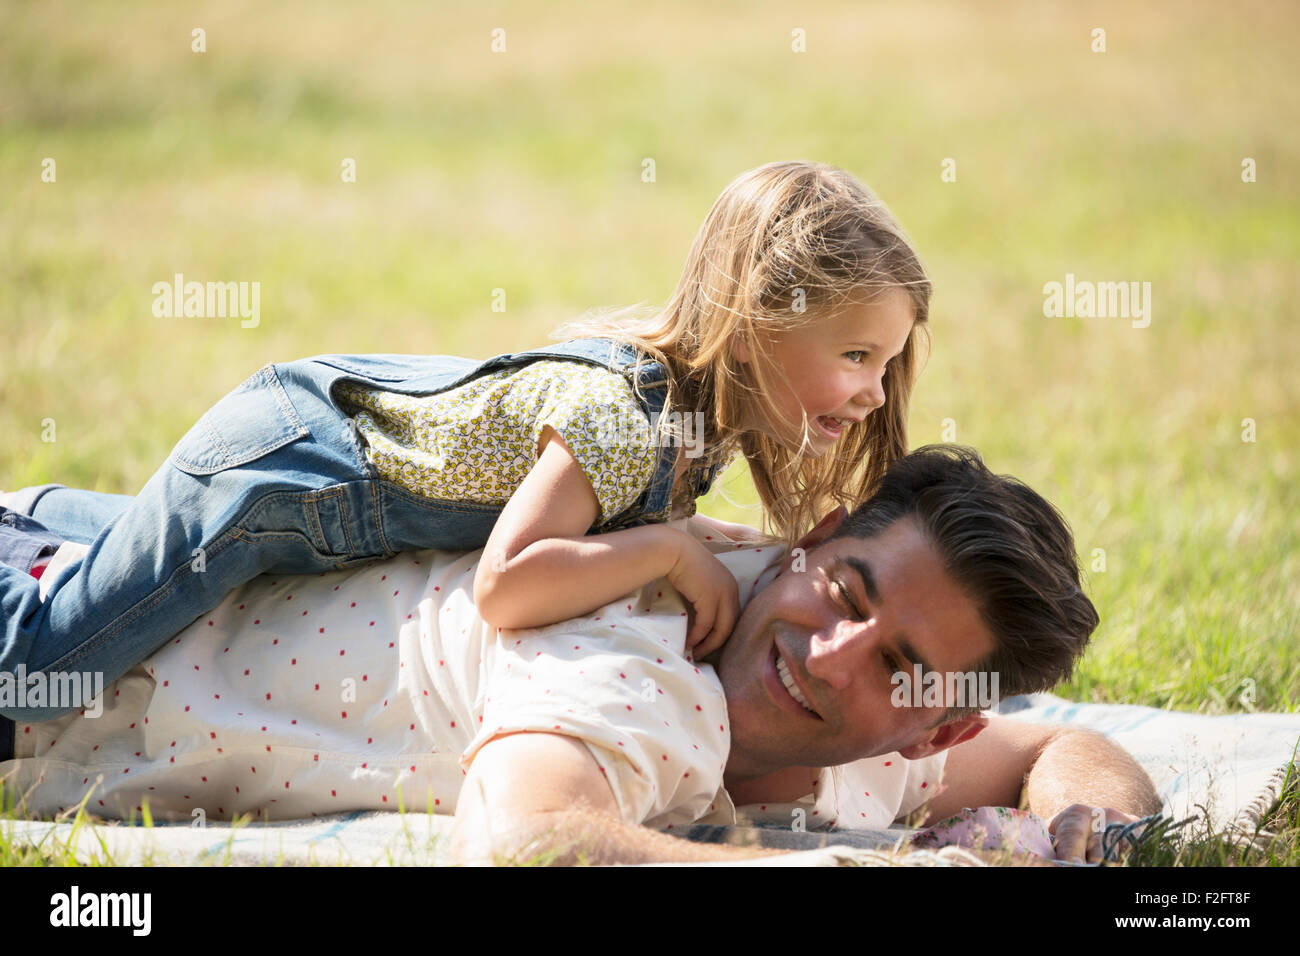 Playful daughter laying on top of father in sunny field Stock Photo